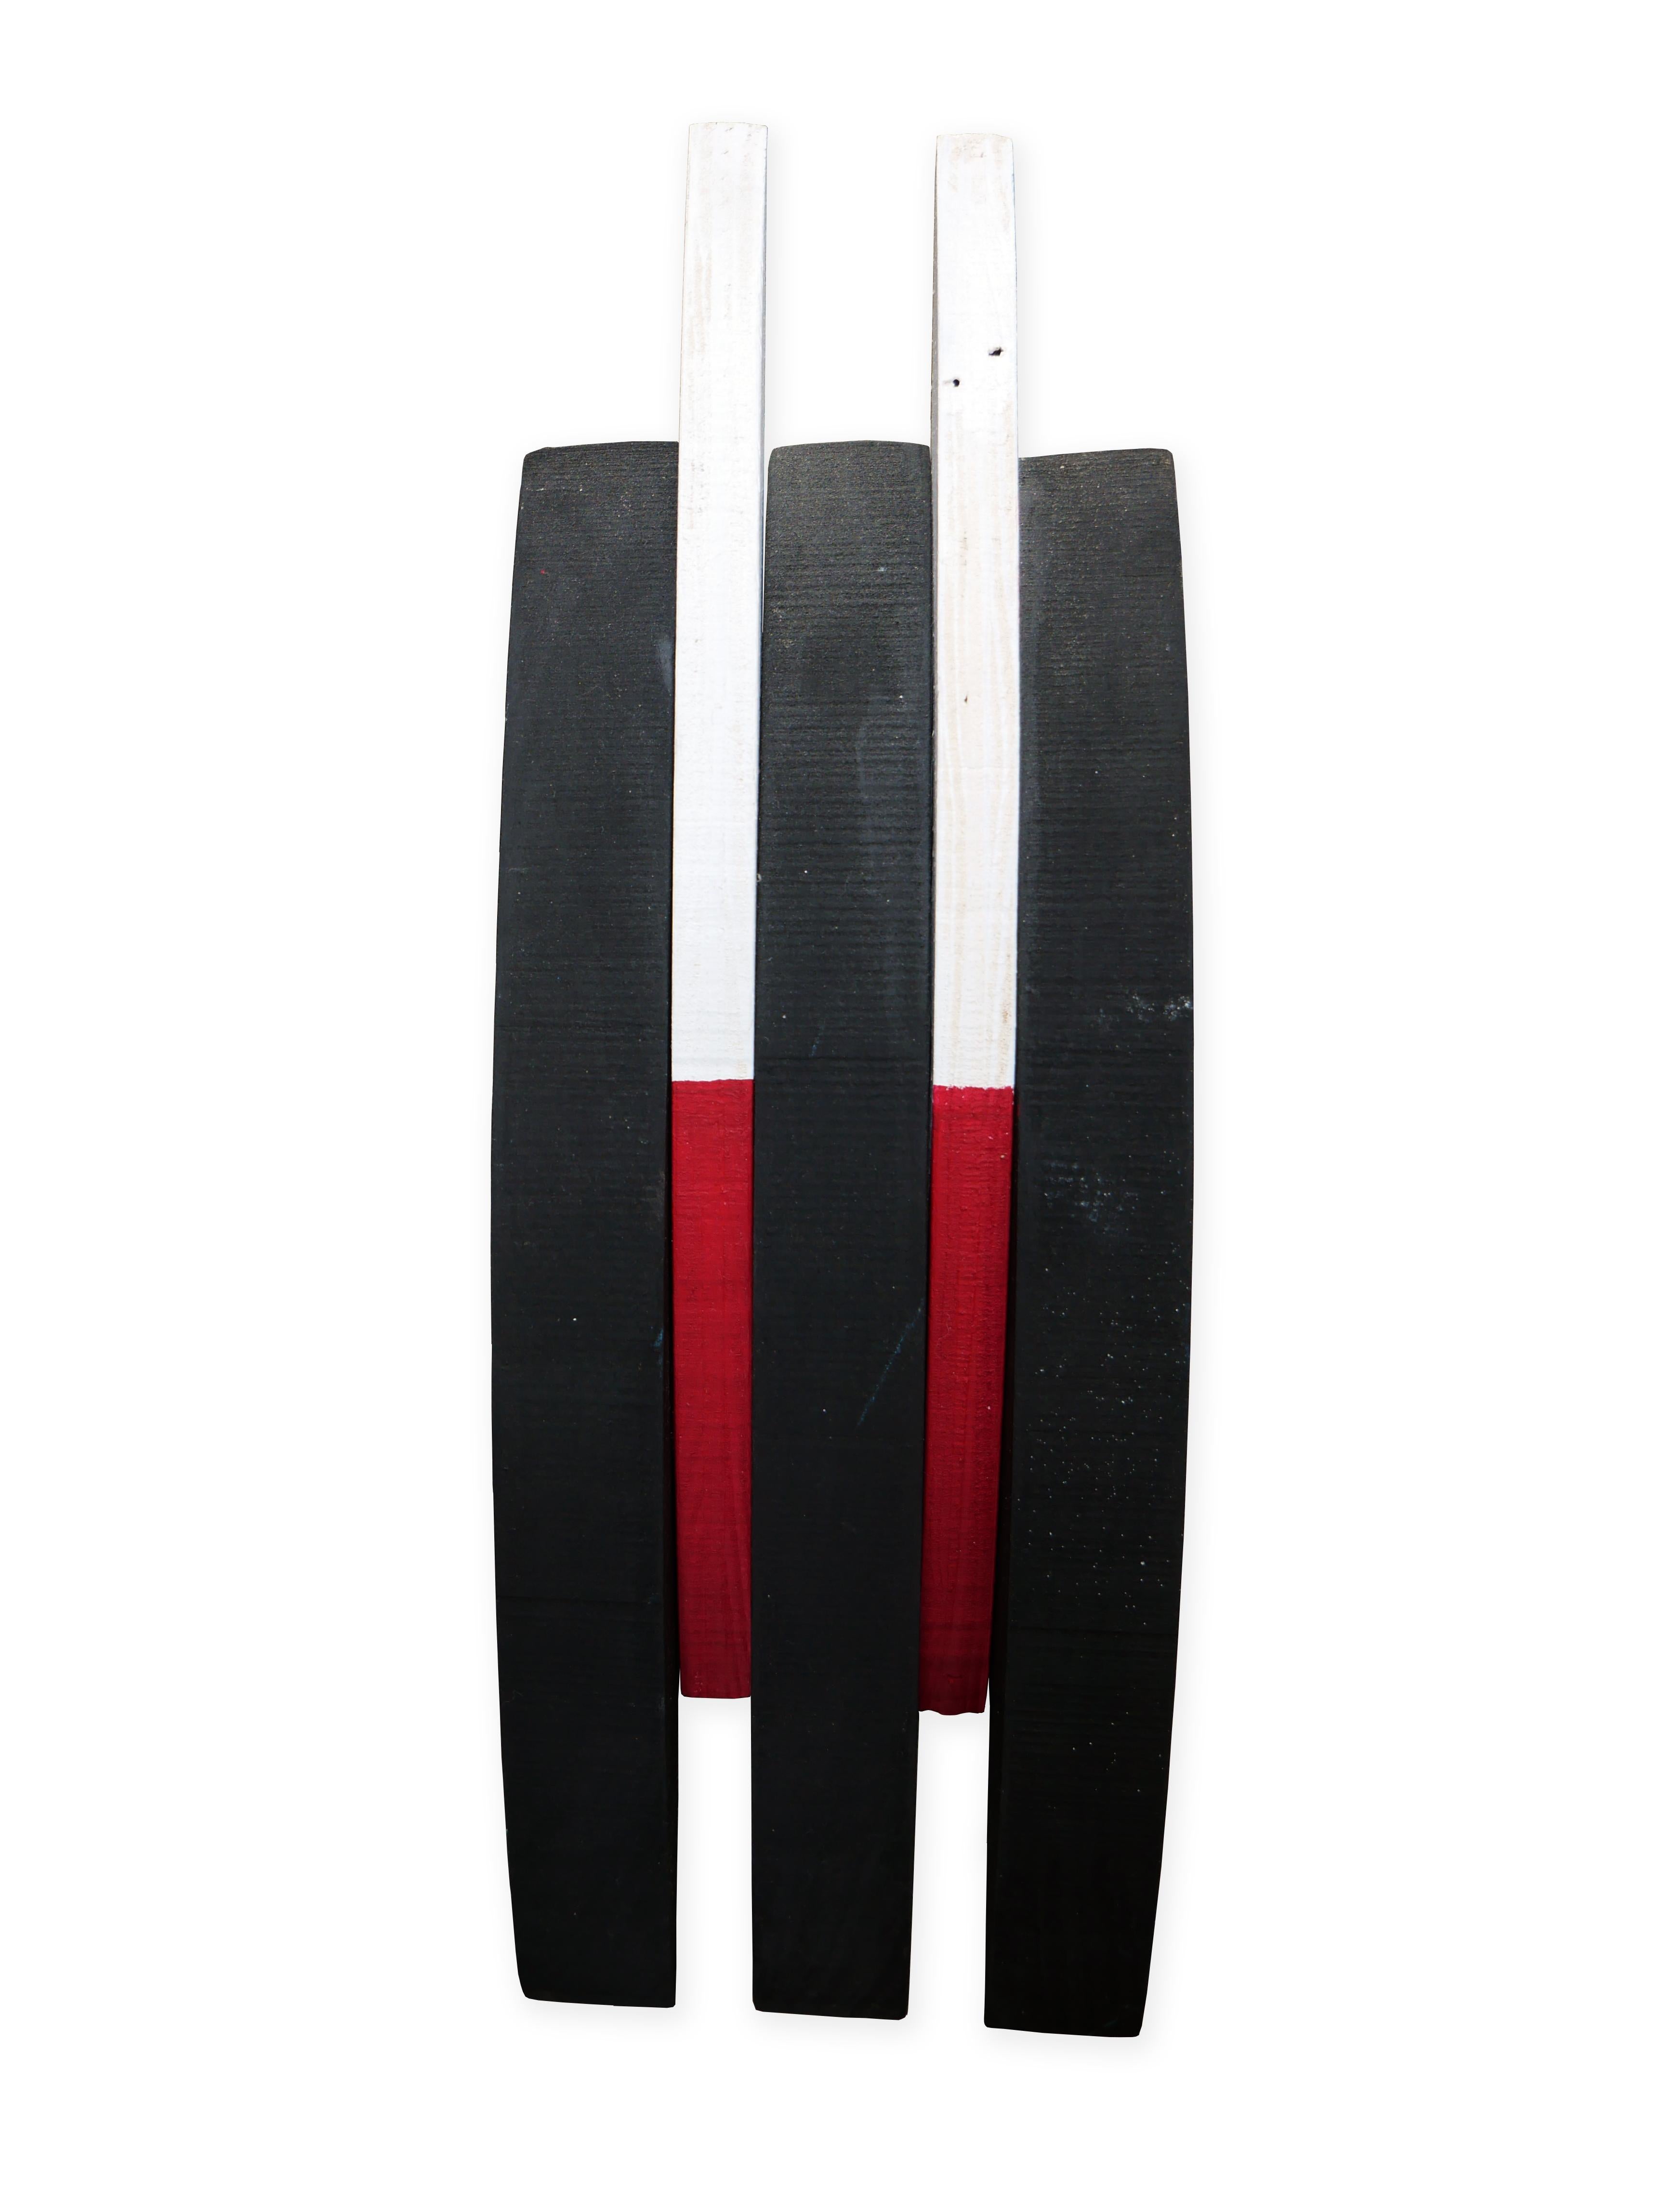 “Minimal 5” Red, White, and Black Geometric Abstract Wooden Sculpture